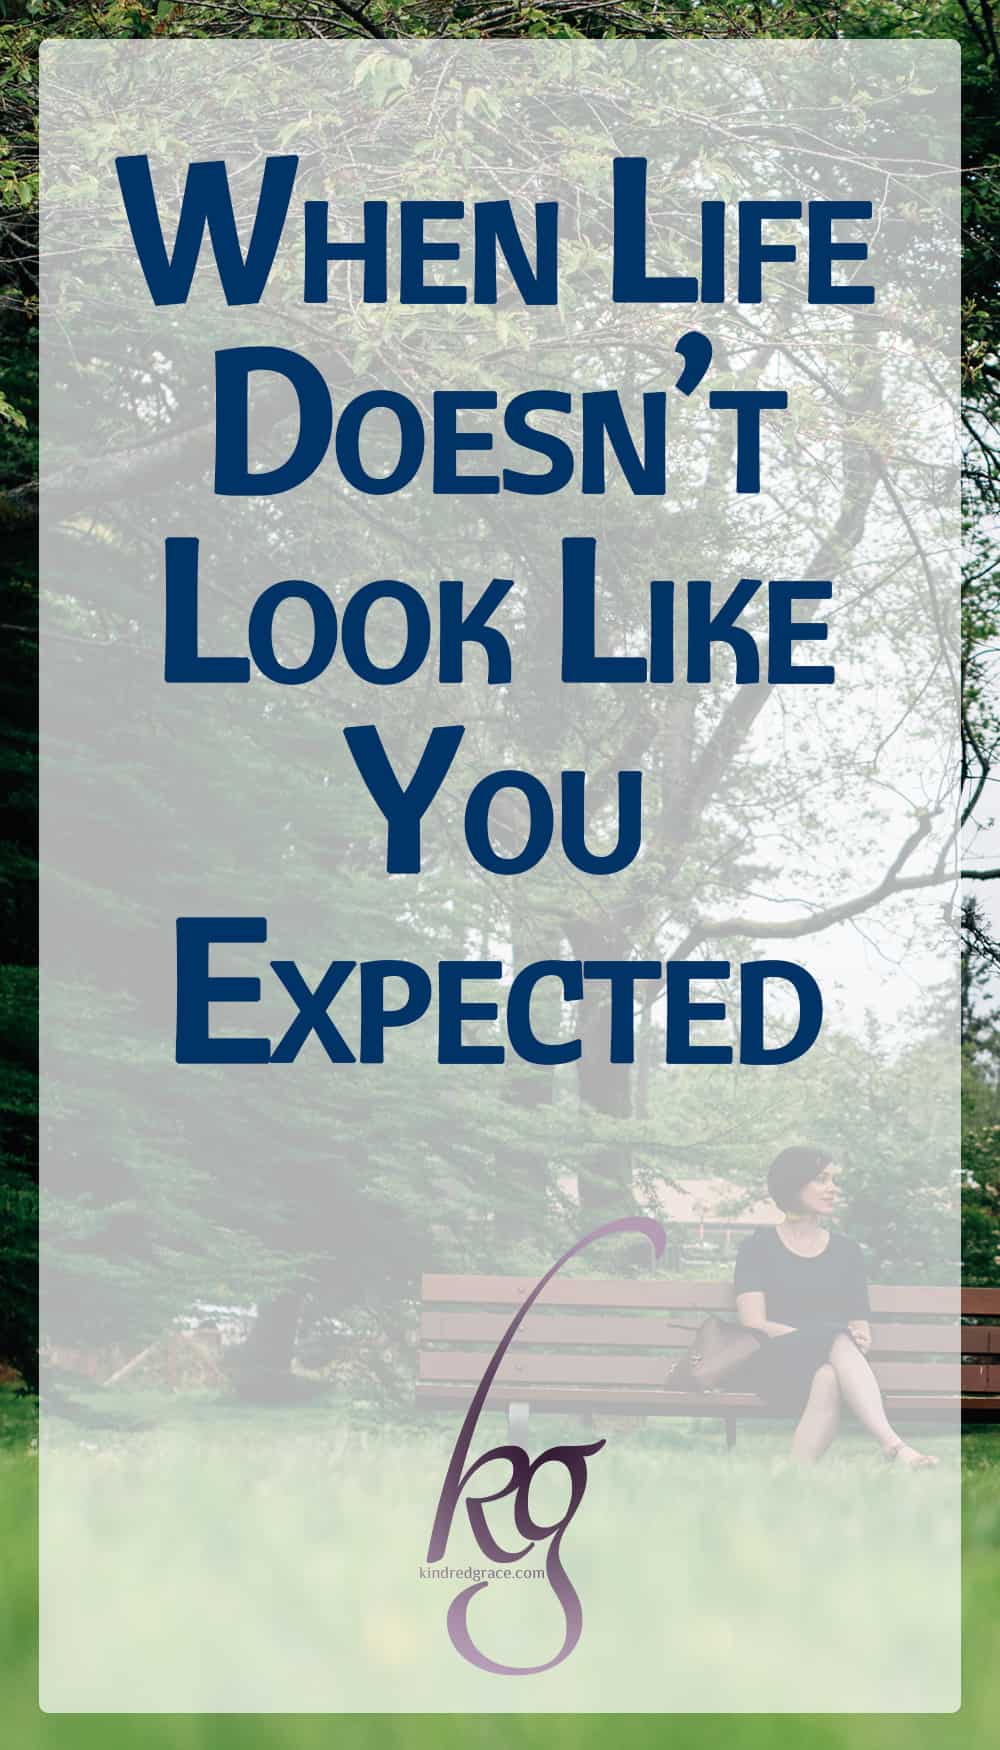 When Life Doesn’t Look Like You Expected via @KindredGrace